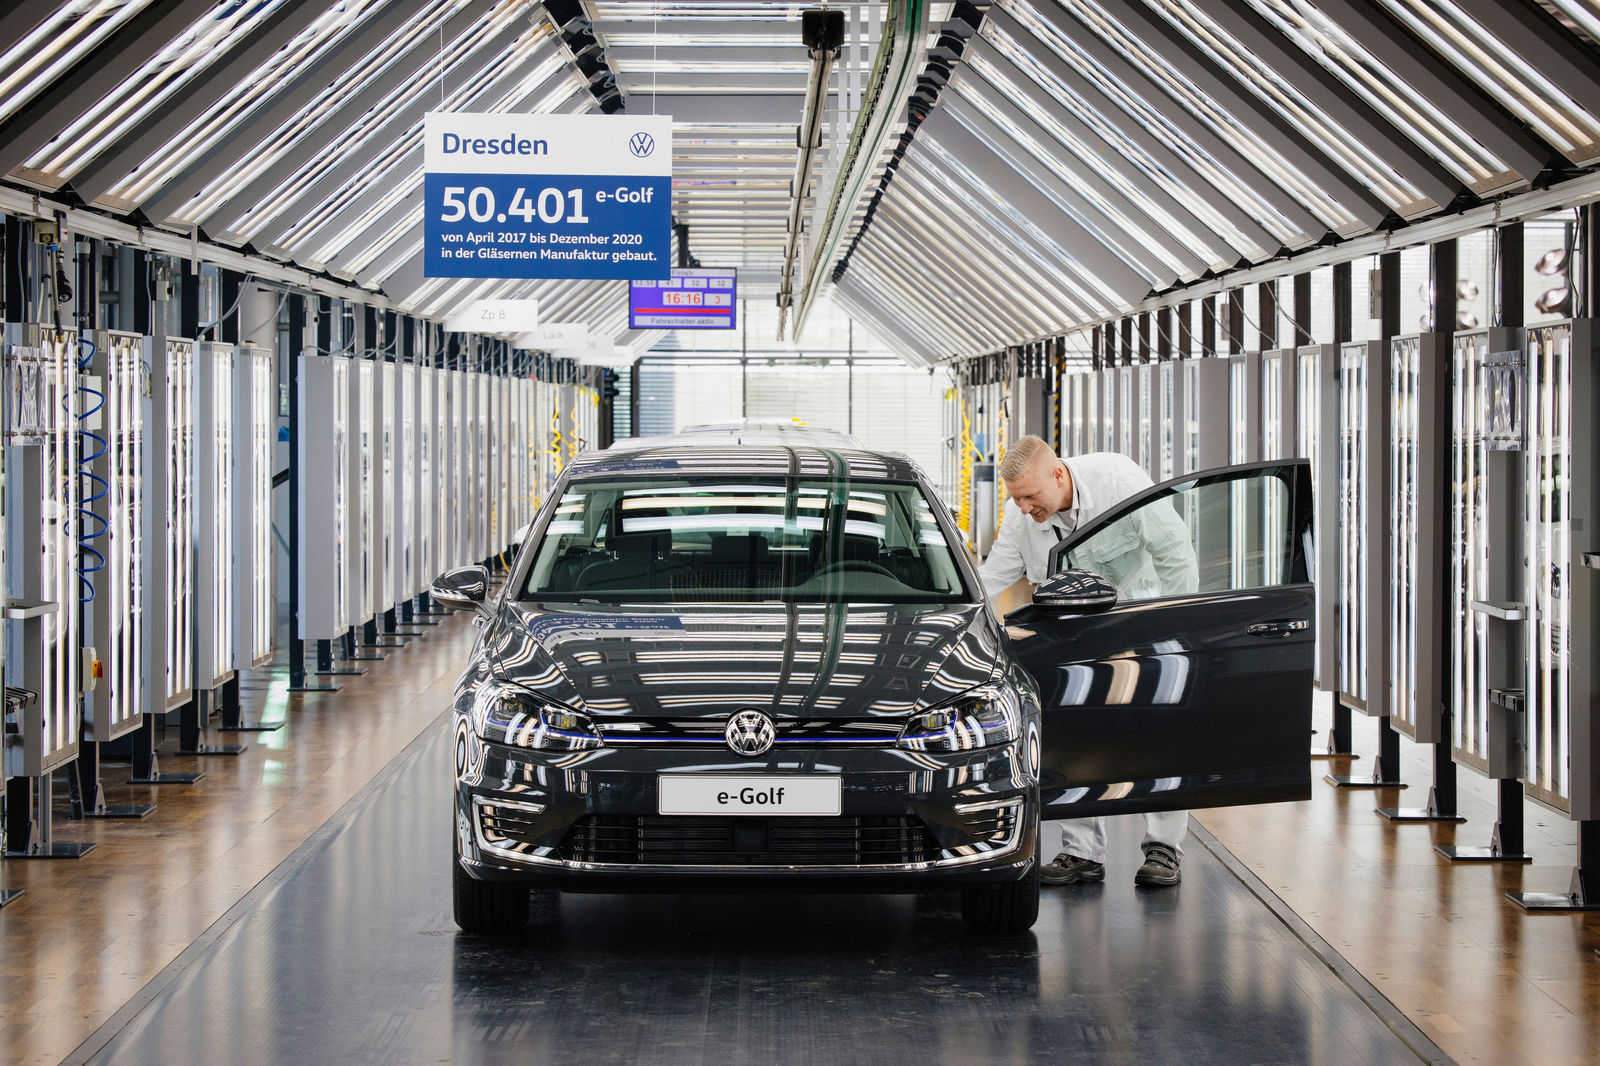 Dresden: After 50,401 vehicles, production ends in the Transparent Factory Dresden